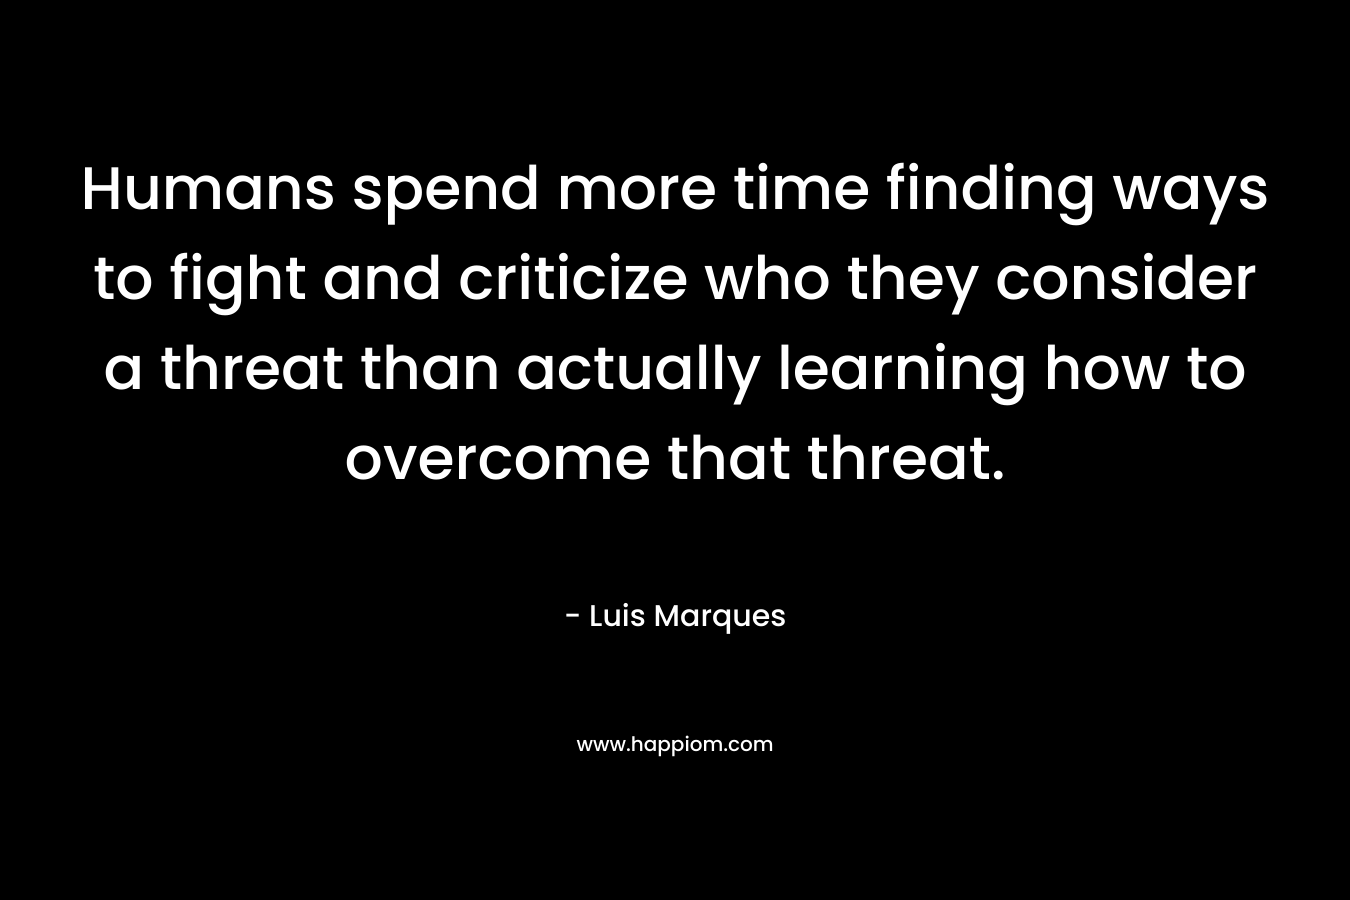 Humans spend more time finding ways to fight and criticize who they consider a threat than actually learning how to overcome that threat.